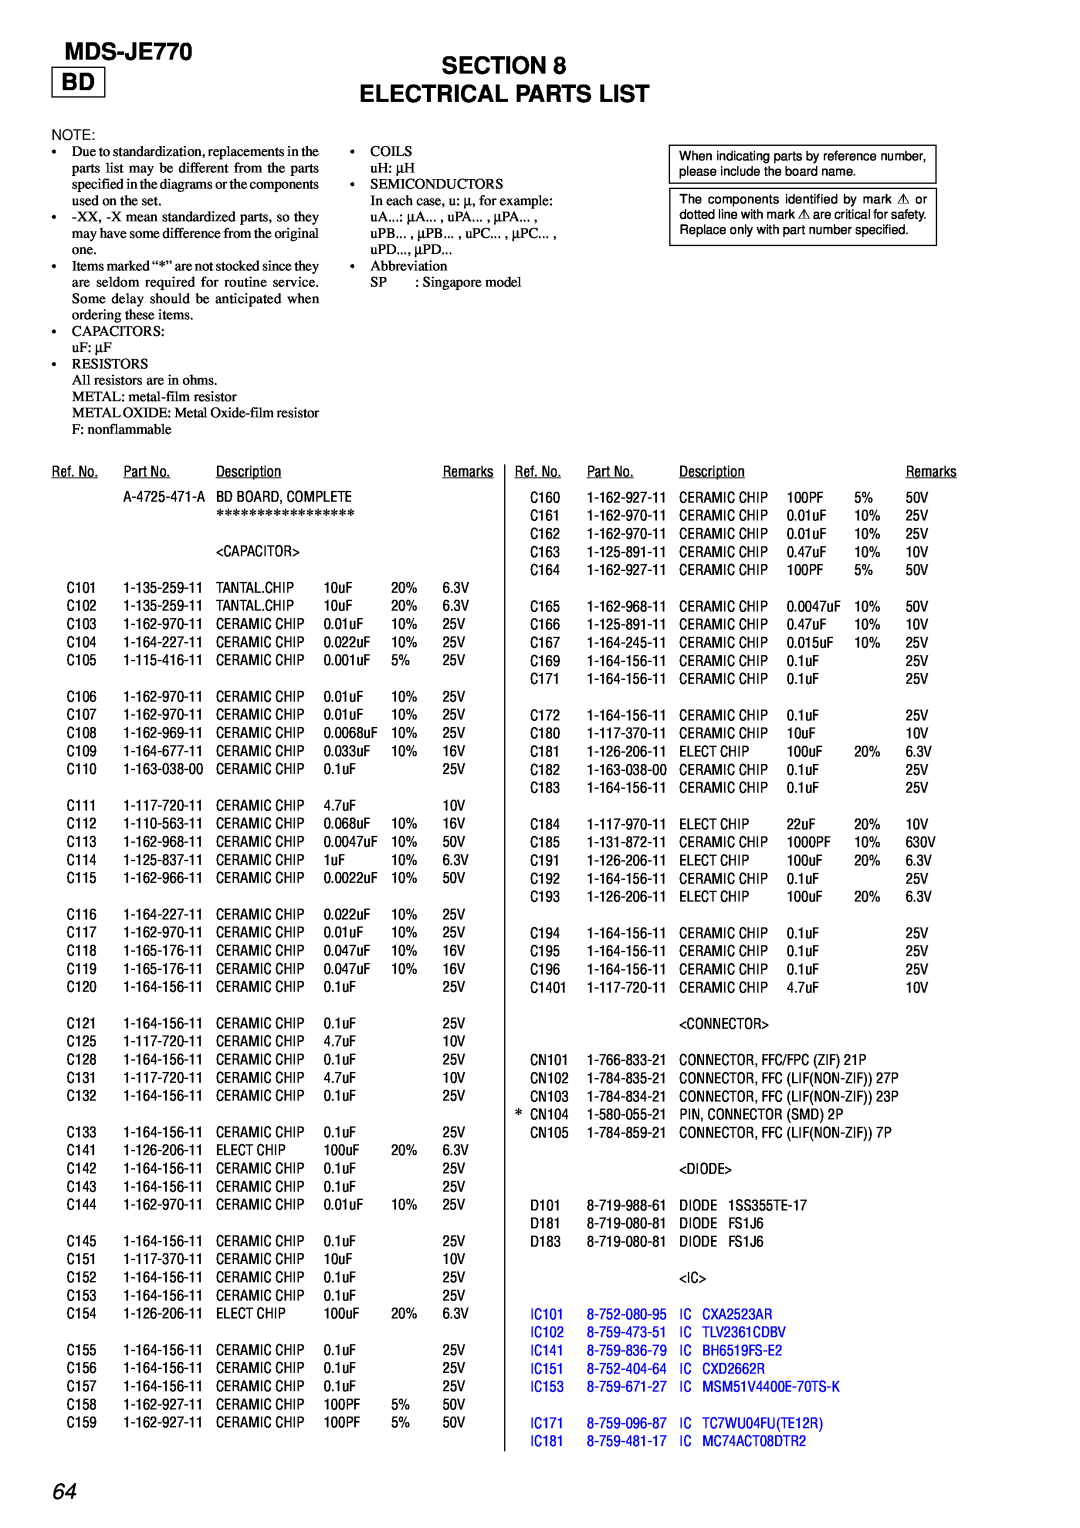 Sony MDS-JE770 specifications Section, Electrical Parts List 